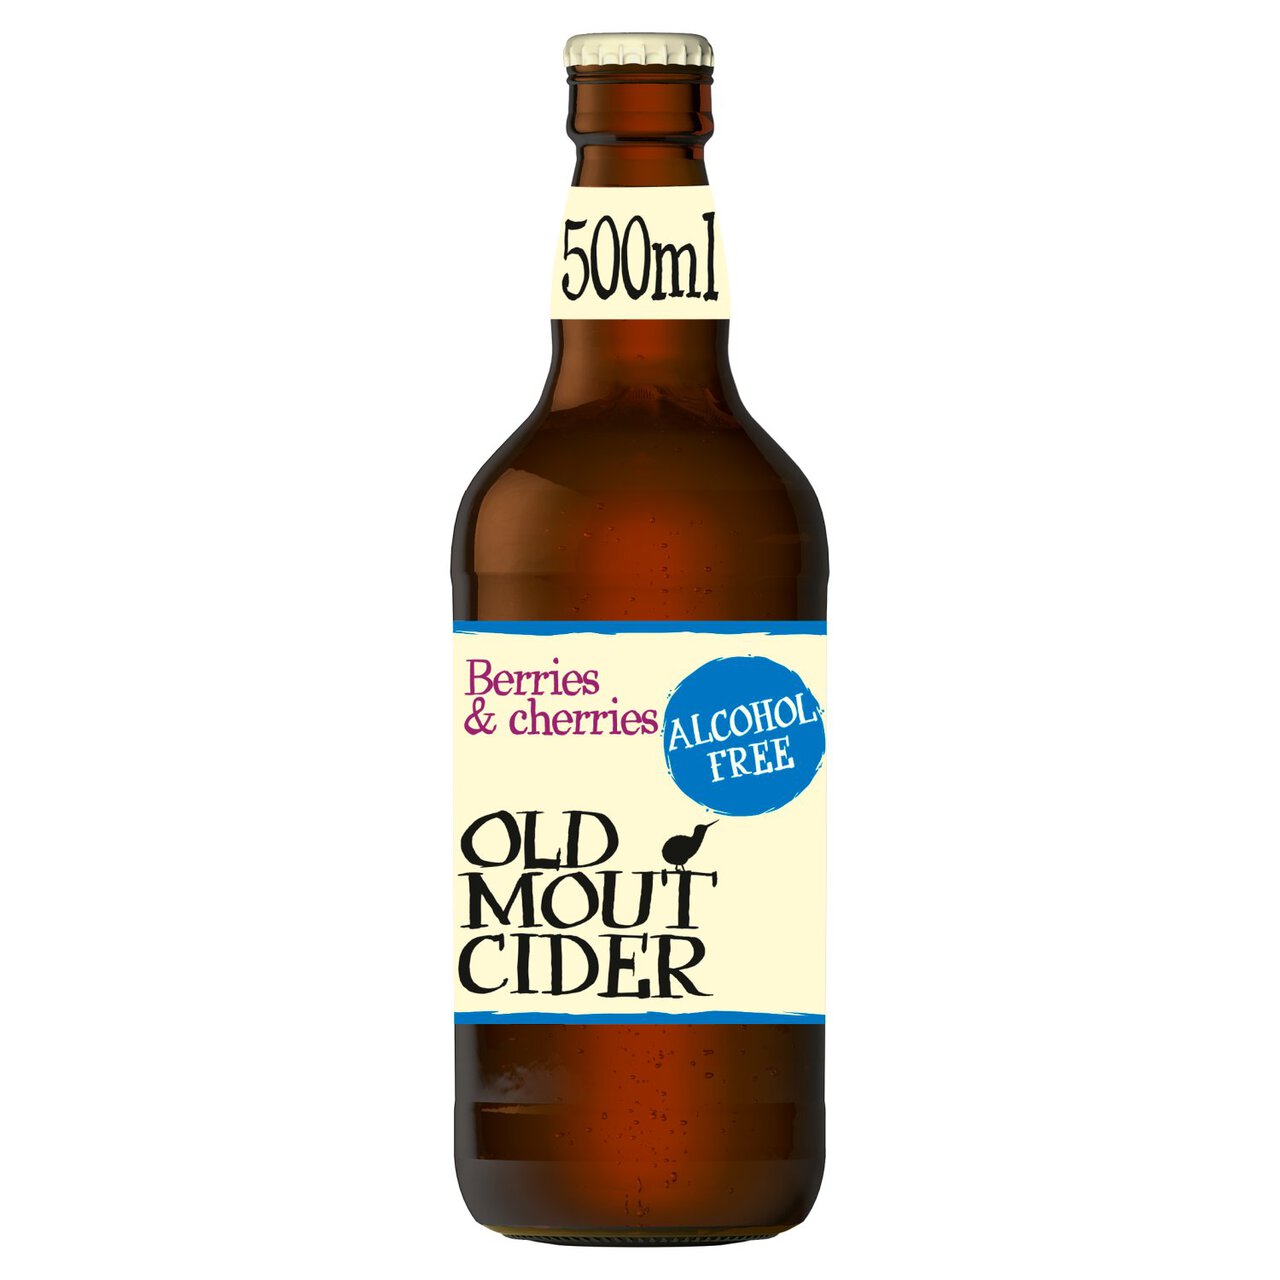 Old Mout Cider Berries & Cherries Alcohol Free Bottle 500ml